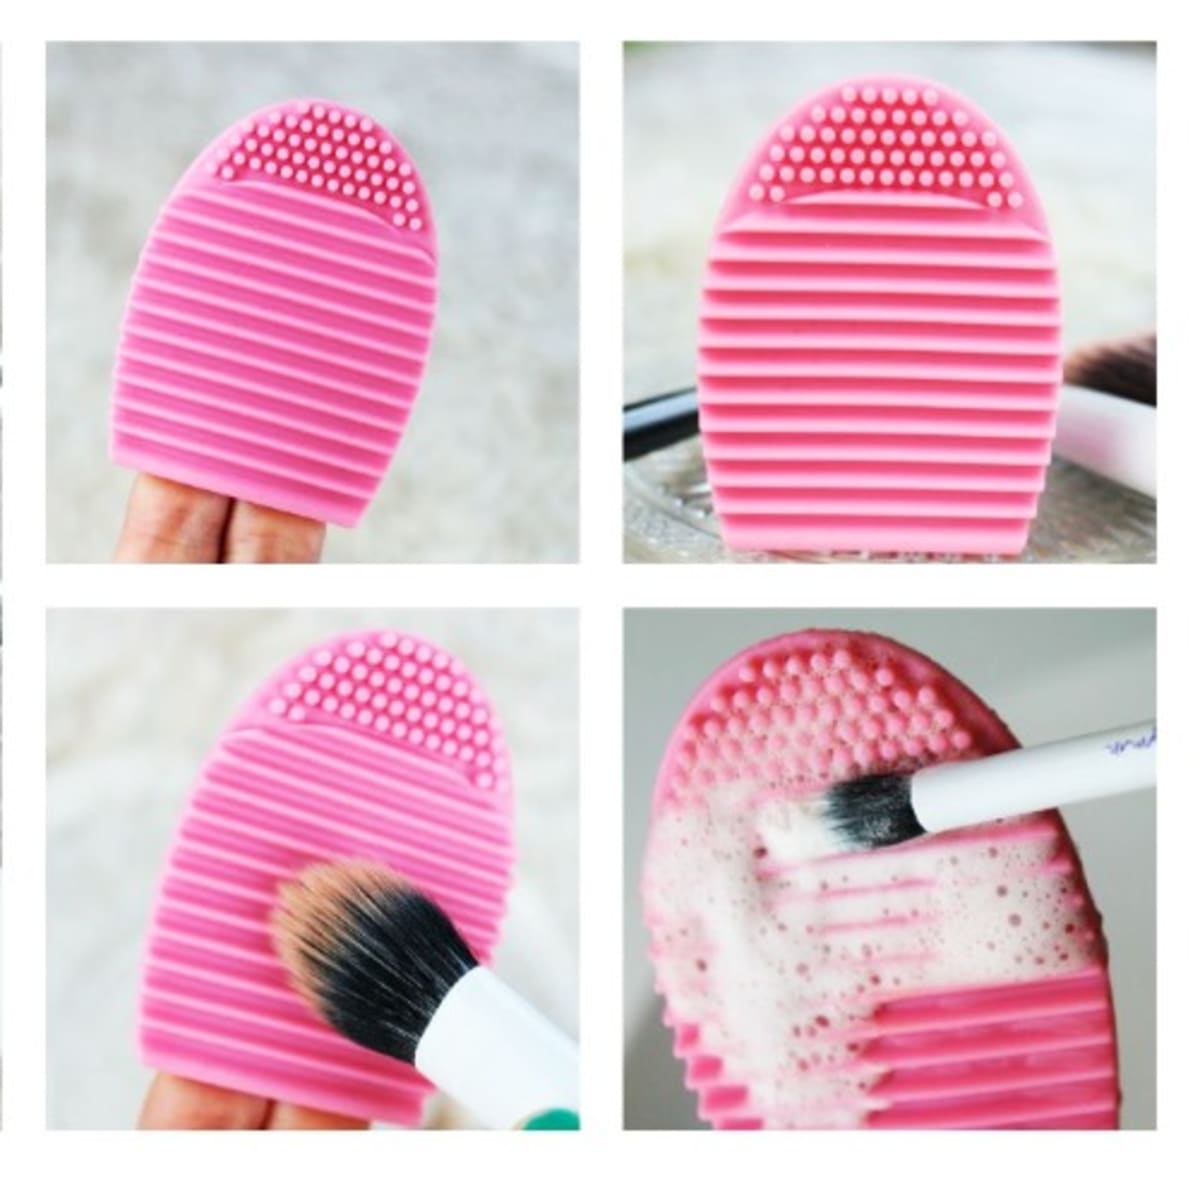 Shop Stylevana - Silicone Makeup Brush Cleaner Egg - 1pc